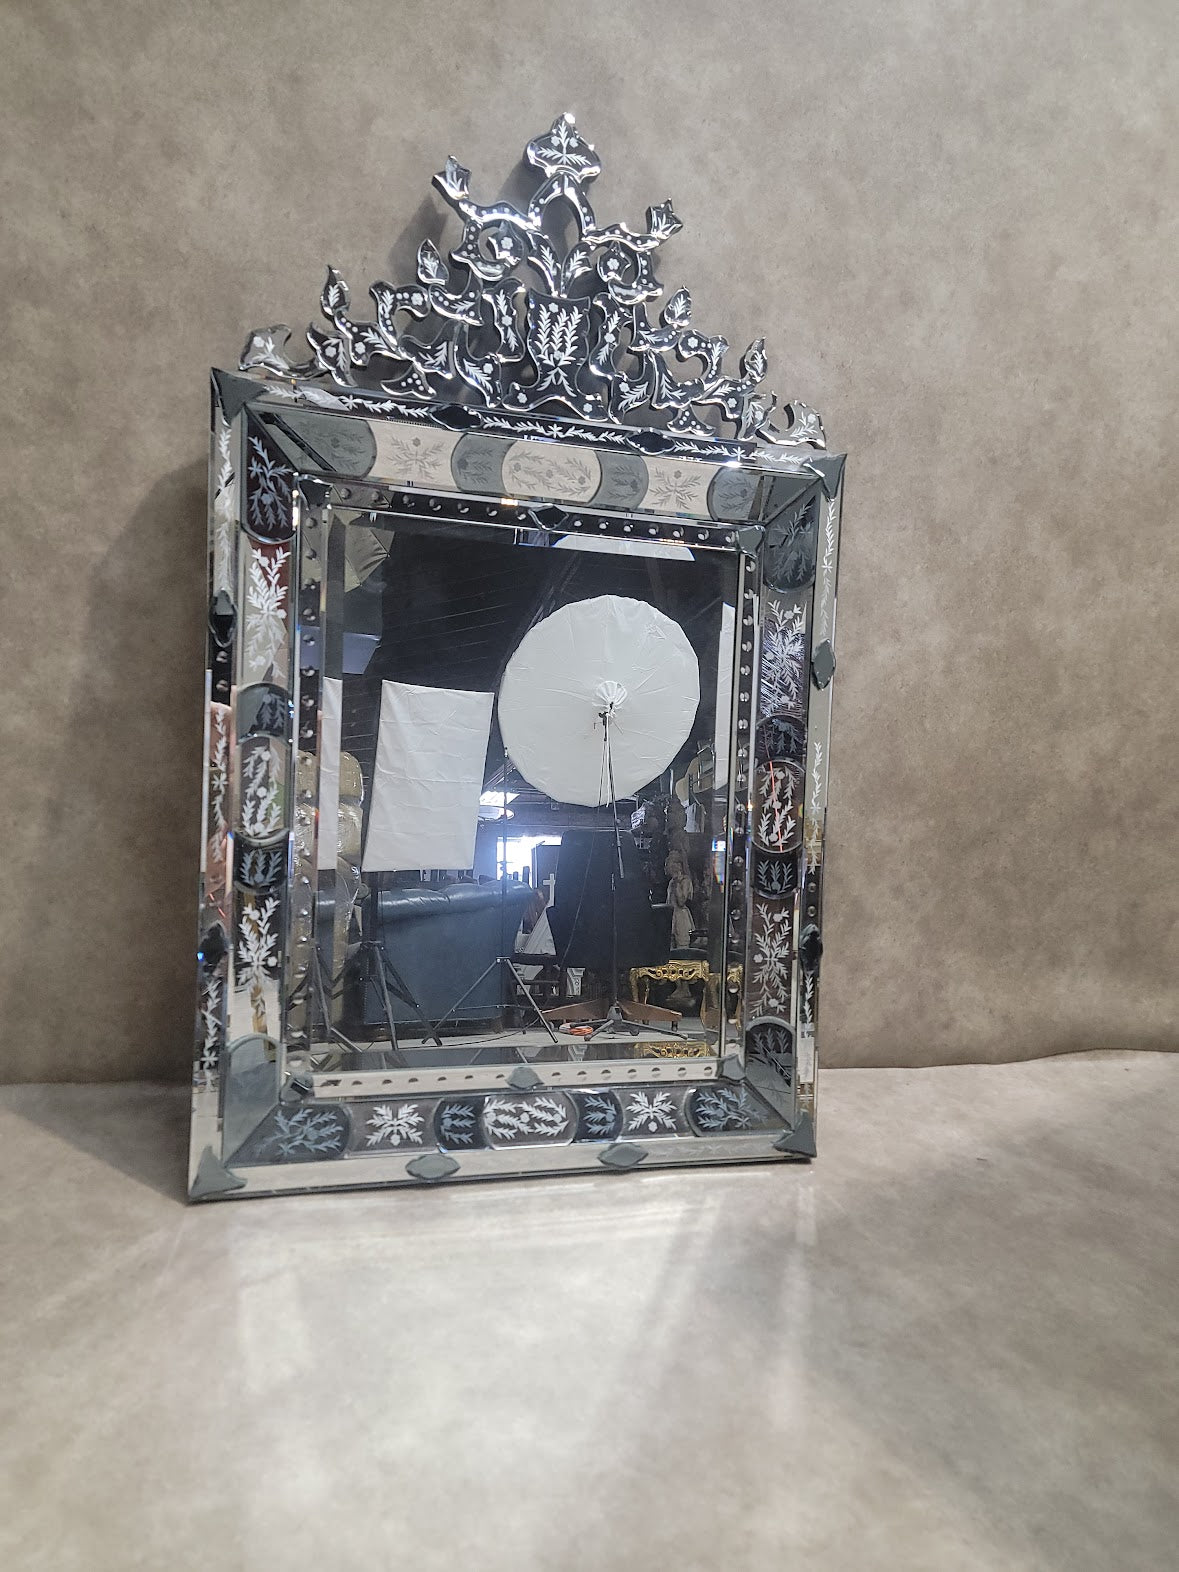 NEW - Vintage Etched & Beveled Wall Venetian Wall Mirror